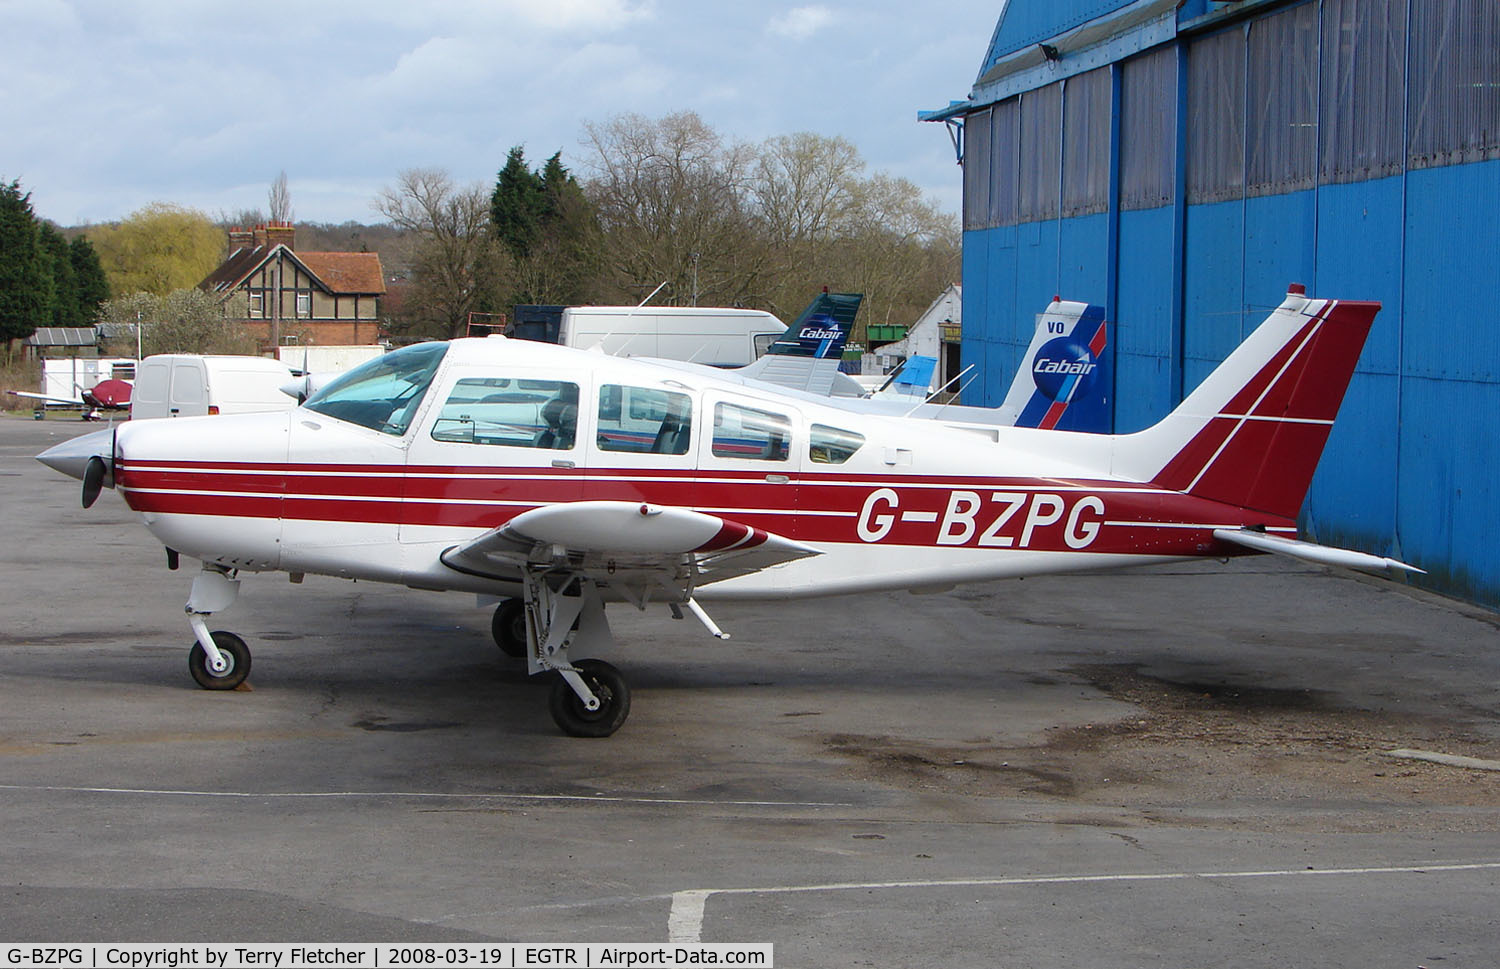 G-BZPG, 1978 Beech C24R C/N MC-556, Part of the busy GA scene at Elstree Airfield in the northern suburbs of London